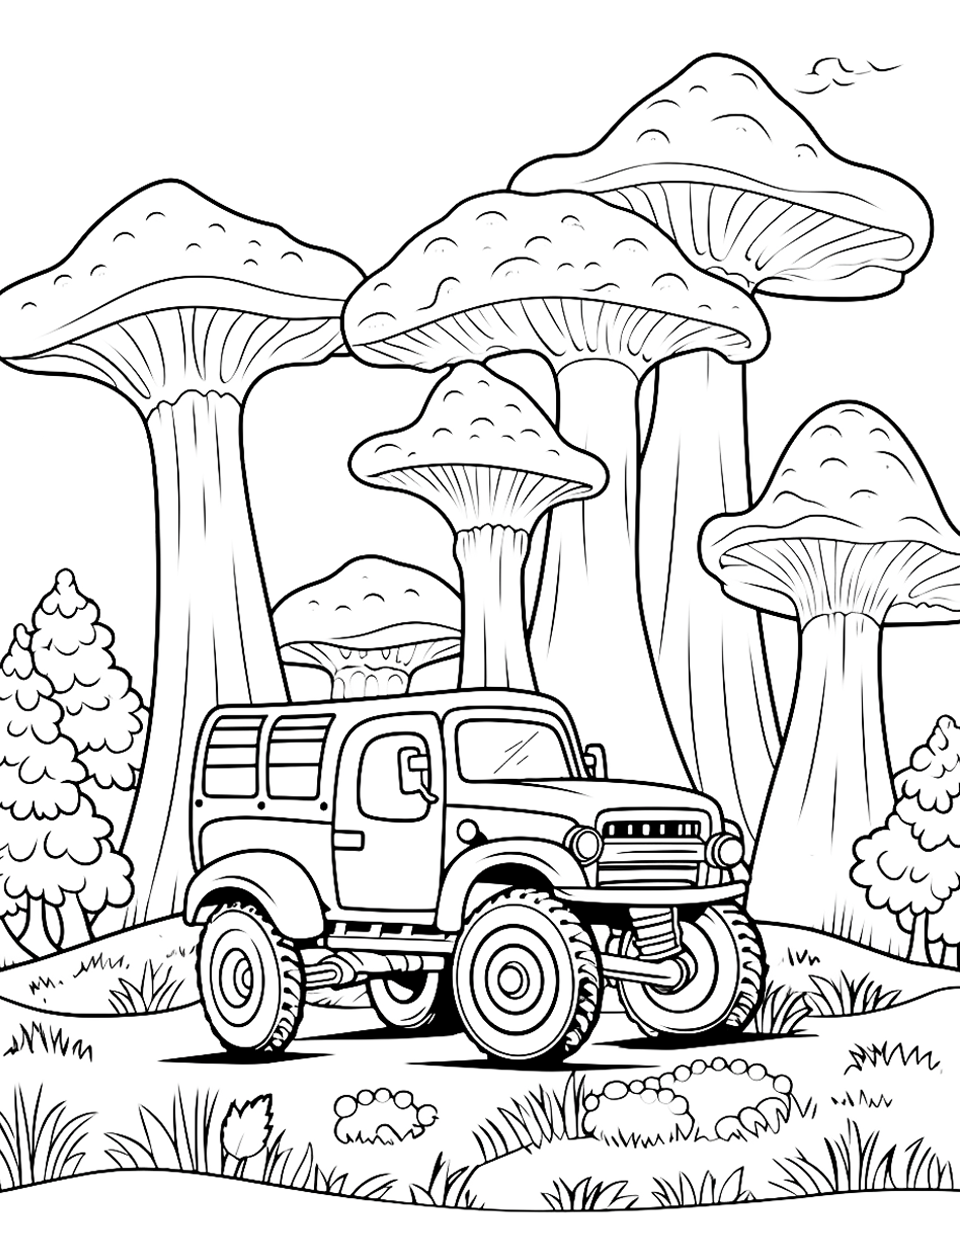 Mushroom Meadow Mix Monster Truck Coloring Page - A monster truck in a field of giant mushrooms.